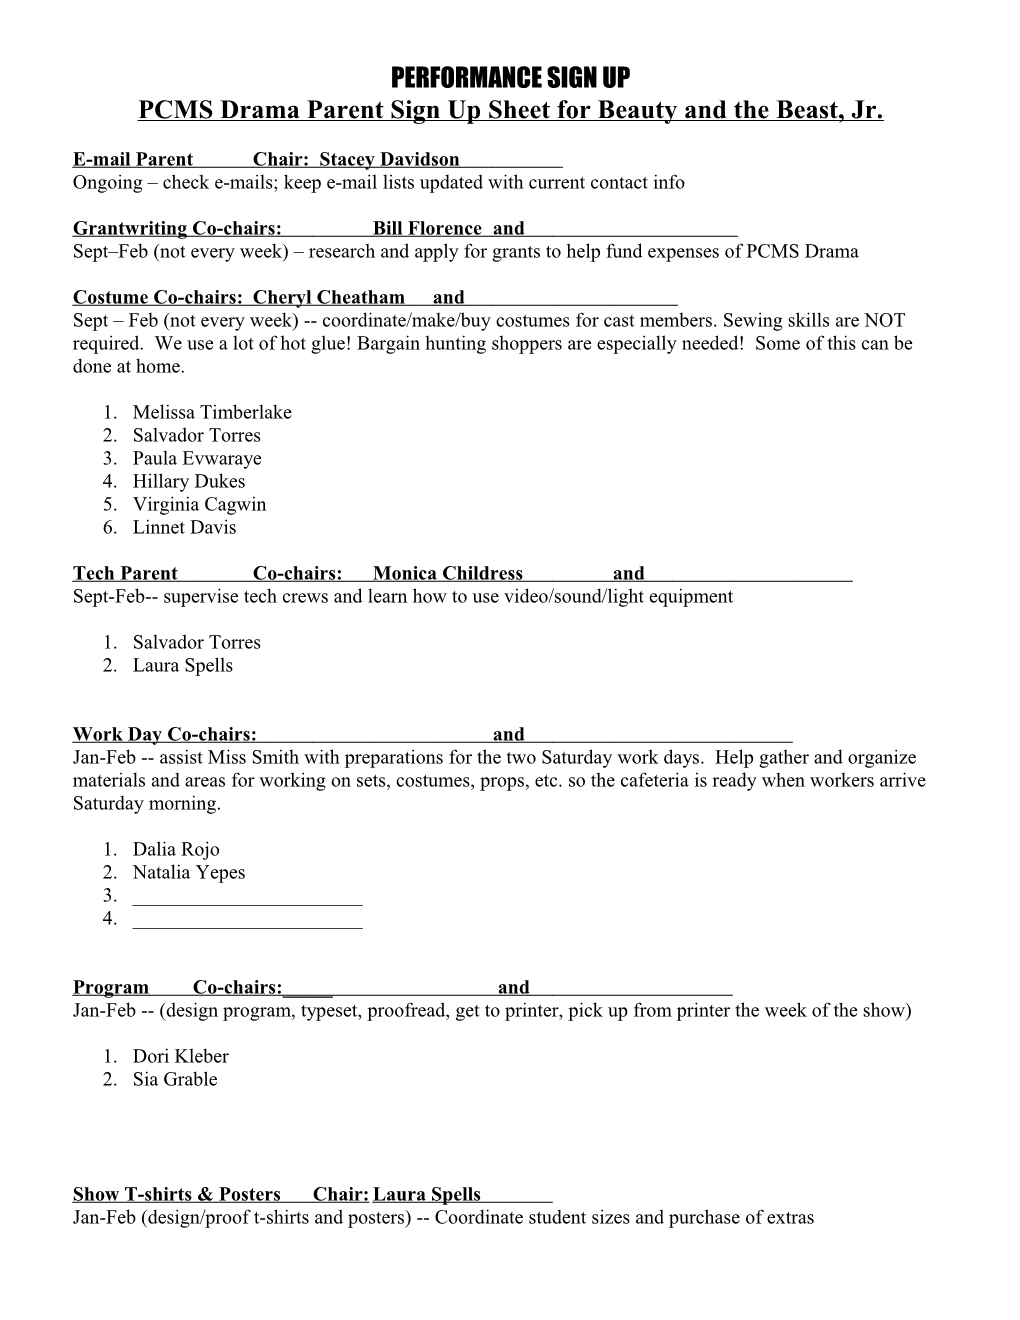 PCMS Drama Parent Sign up Sheet for Beauty and the Beast, Jr